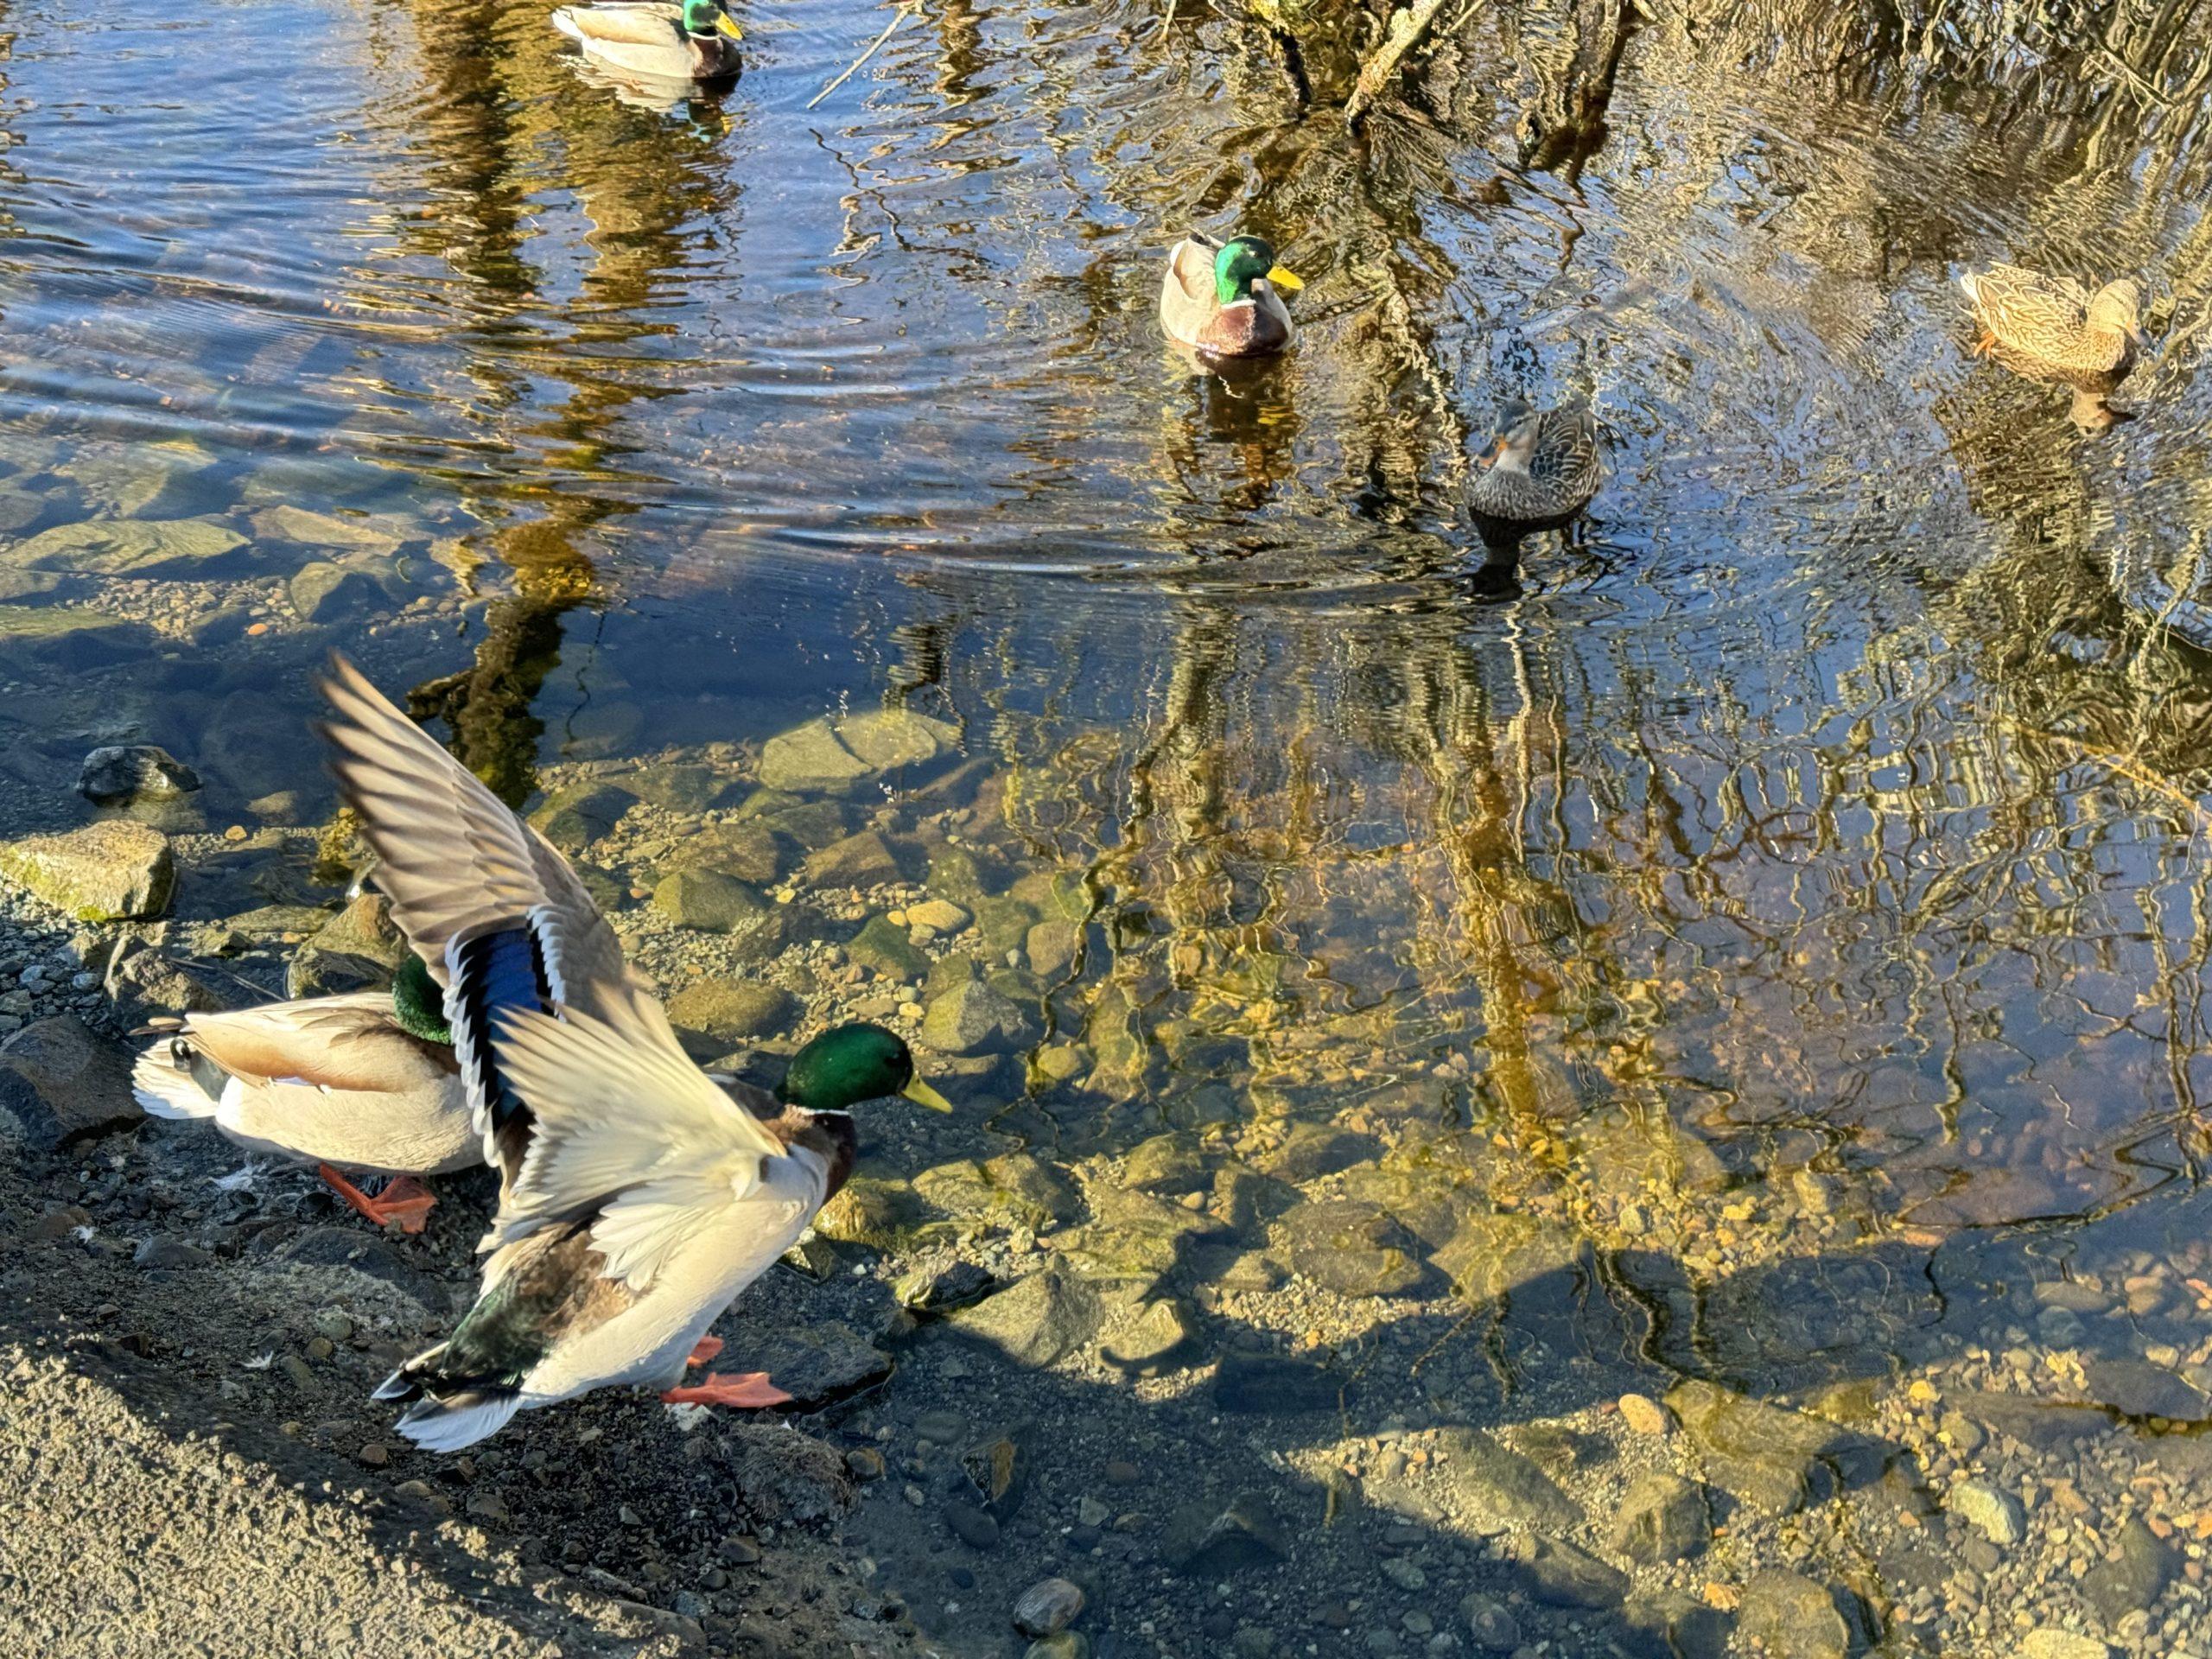 Ducks paddling in a small pond, with one flapping its wings.